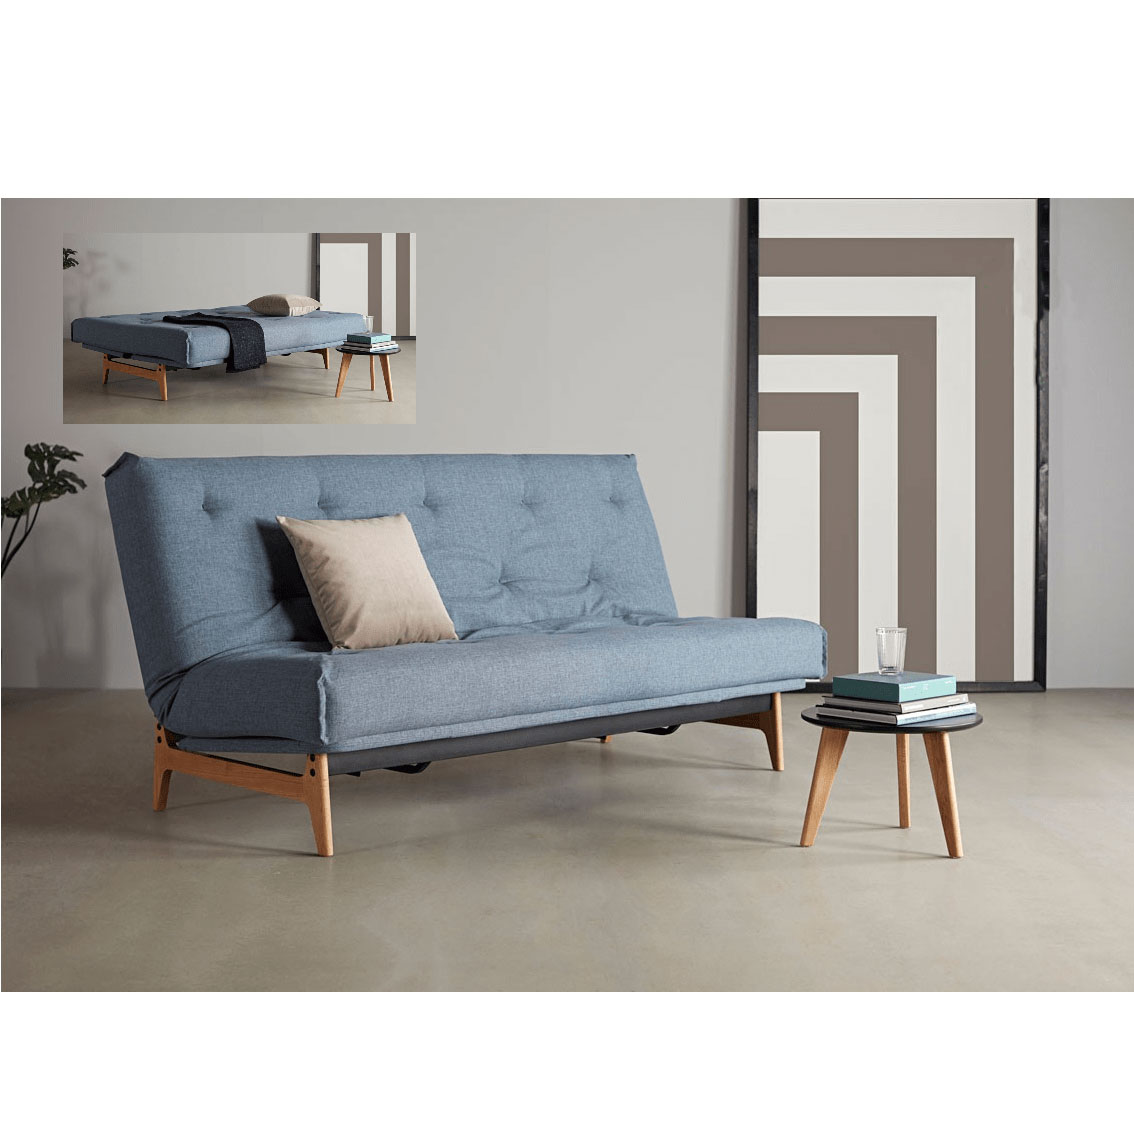 3 Seat Sofa Bed from Danish Innovation | Bed Expert